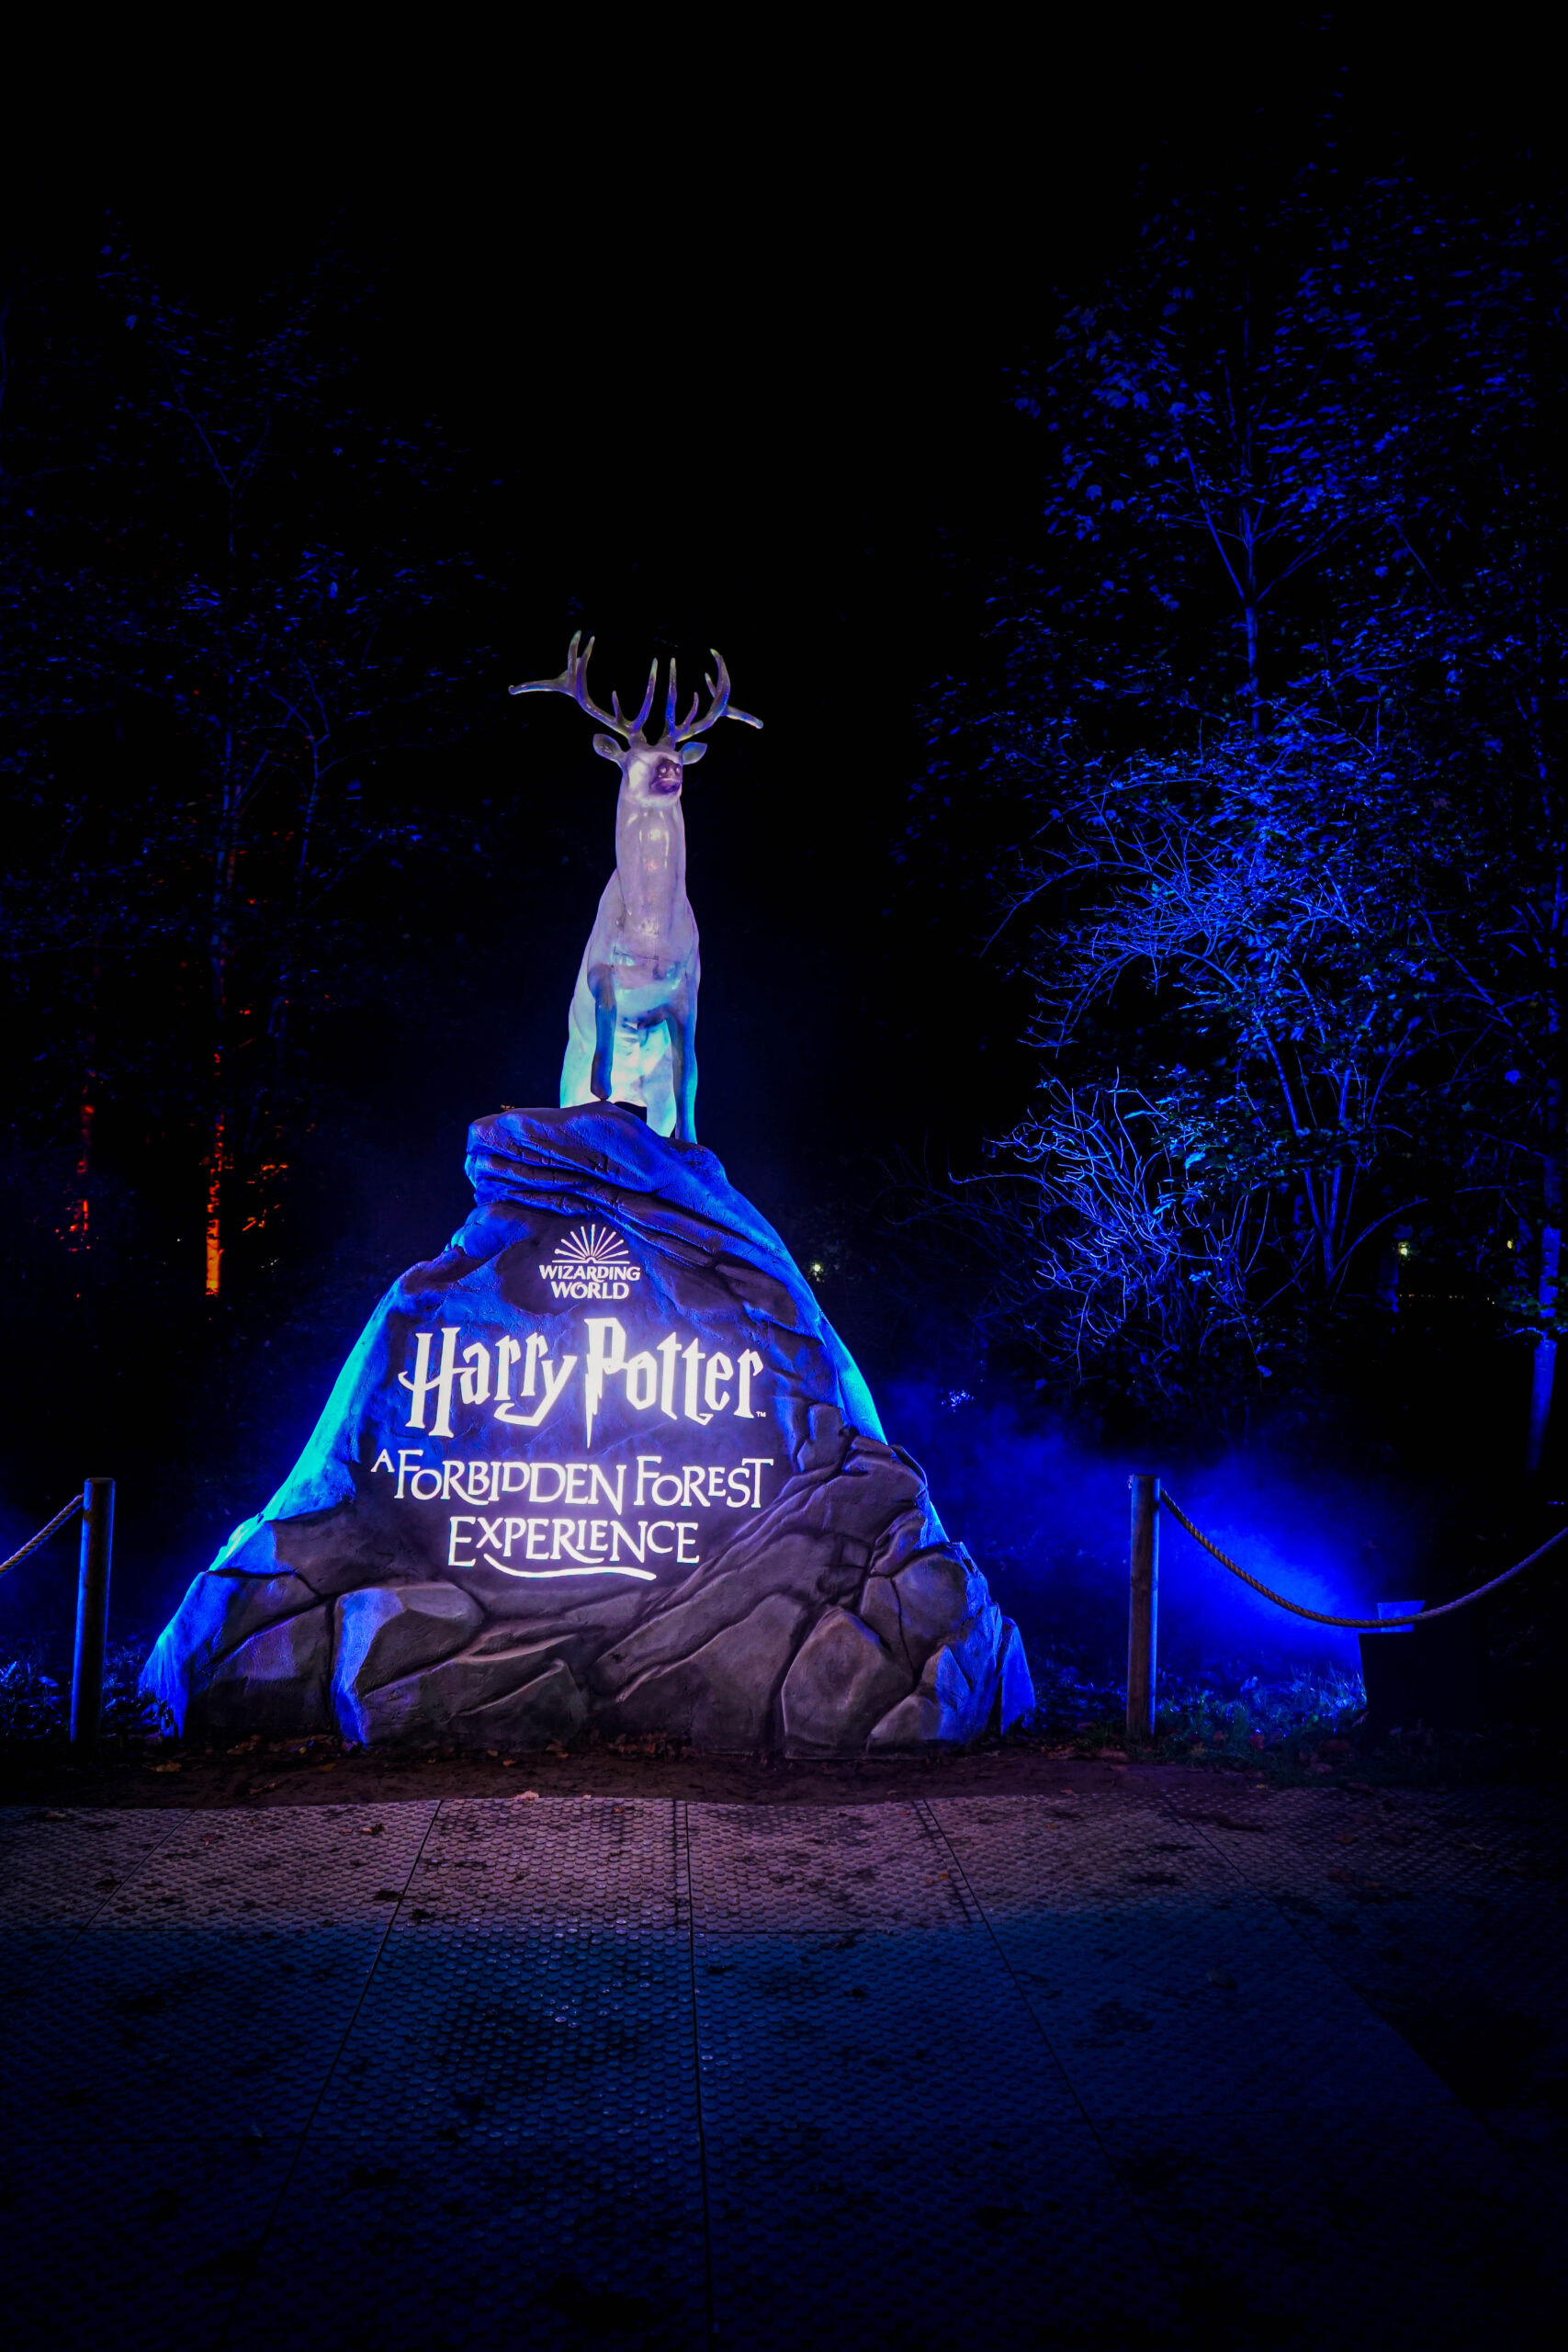 Harry Potter – A Forbidden Forest Experience